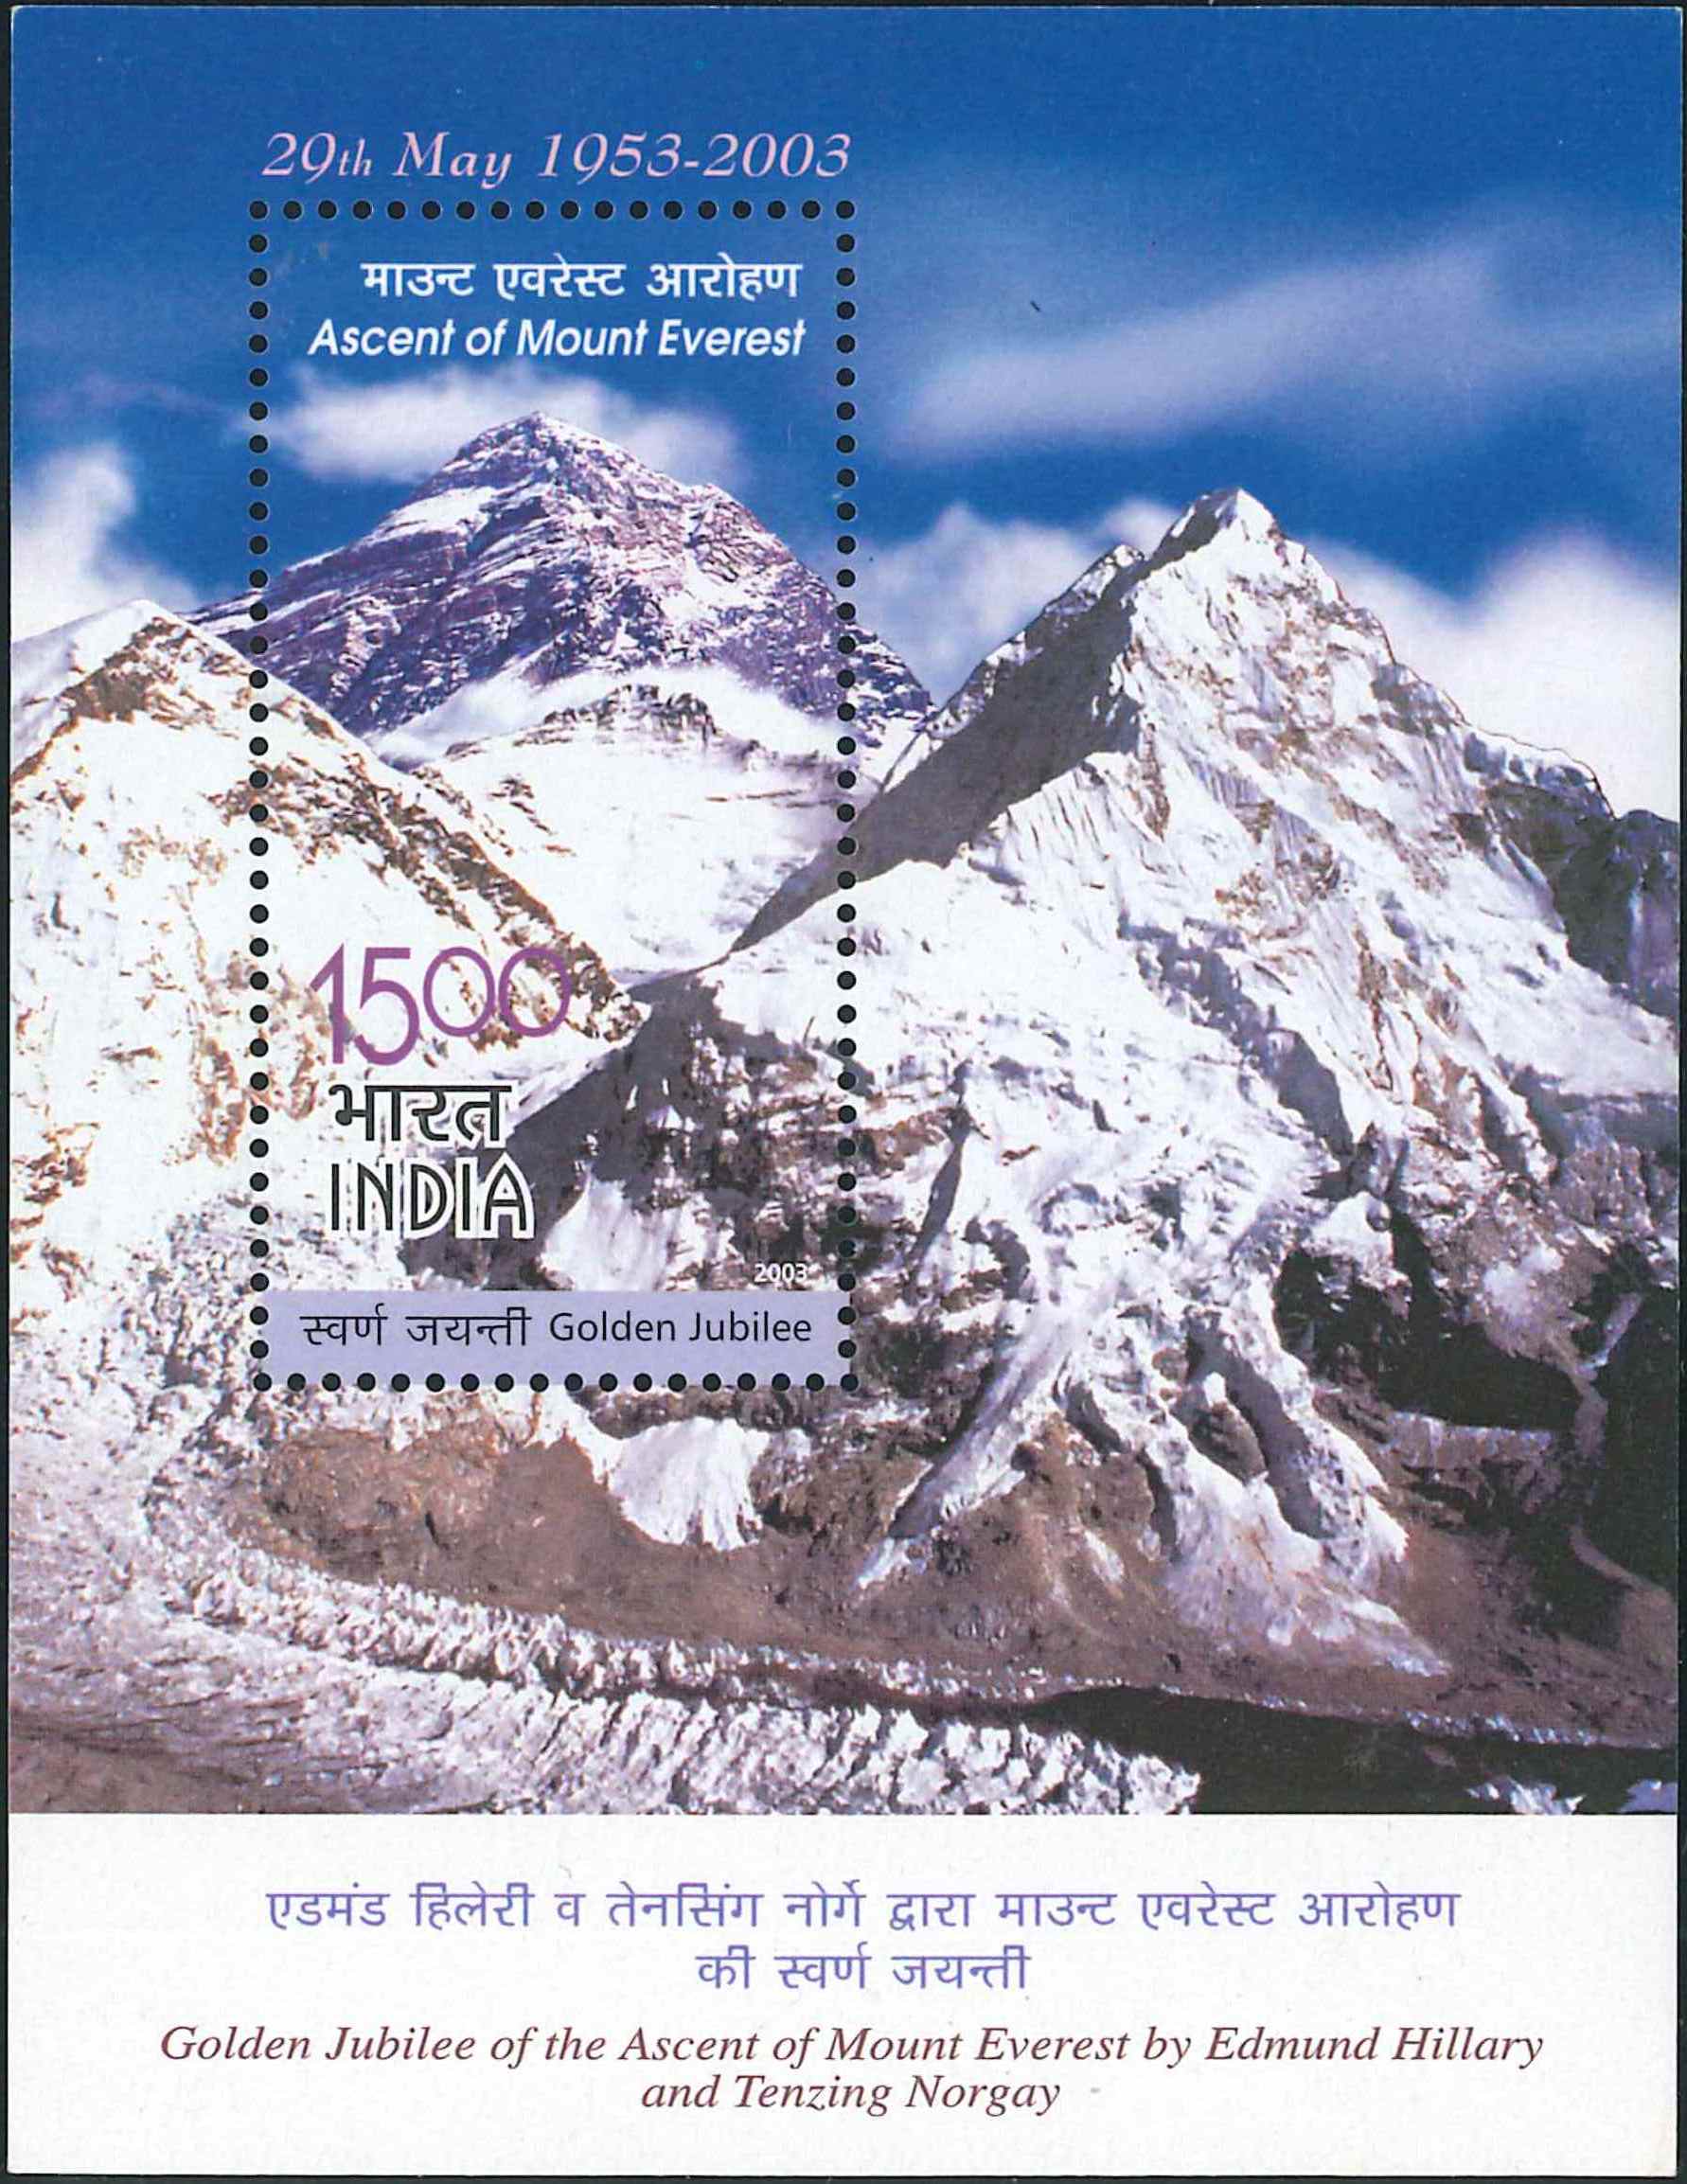  Ascent of Mount Everest by Tenzing Norgay & Edmund Hillary